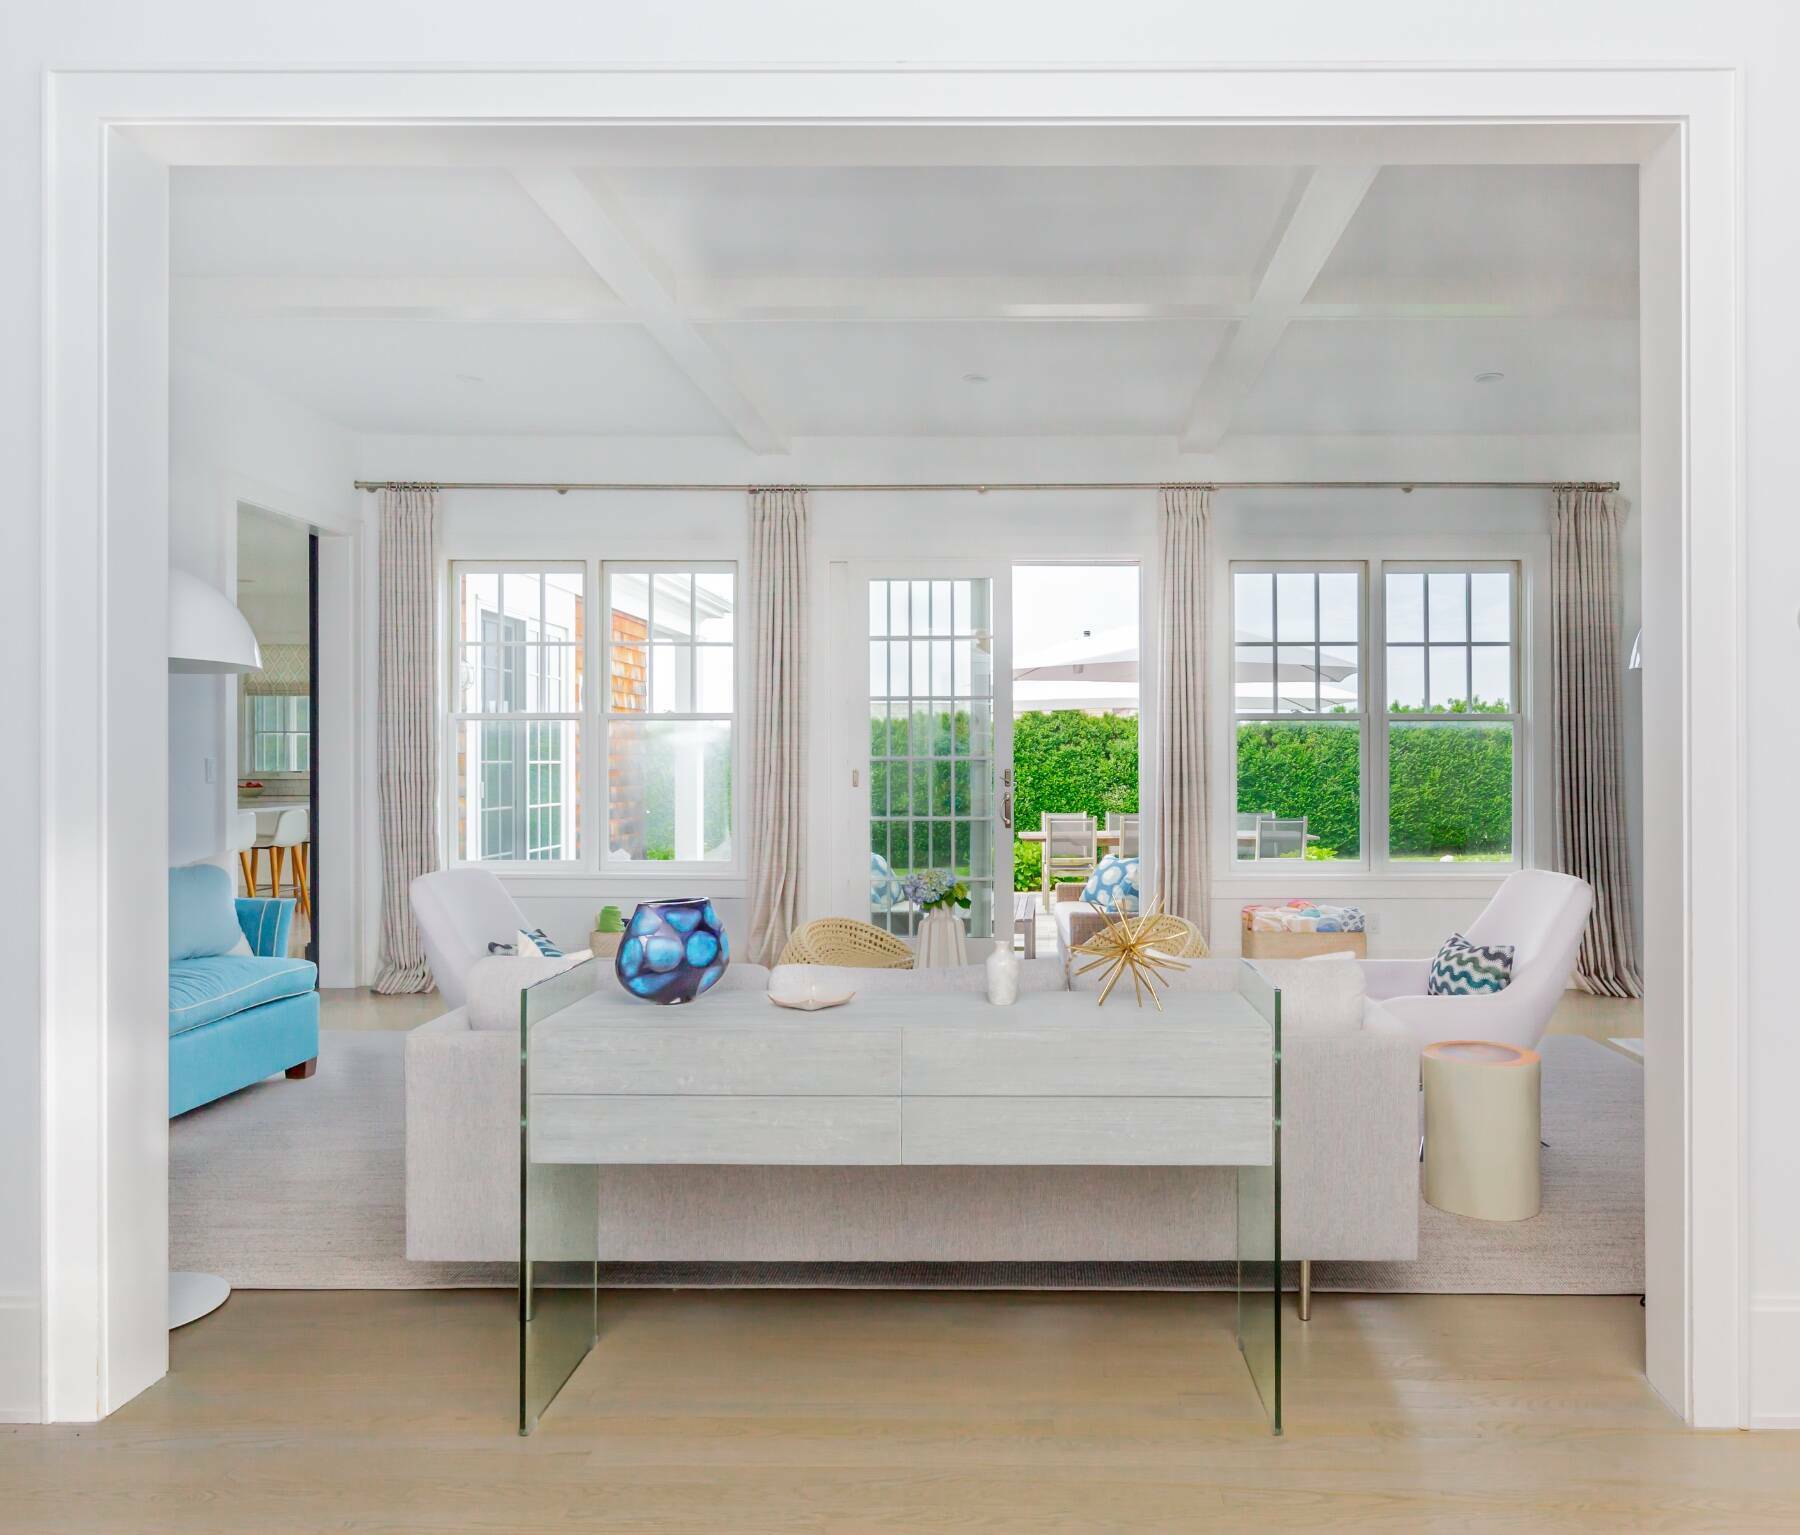 31 Mecox Bay Lane in Water Mill sold for $7.6 million. GAVIN ZEIGLER/COURTESY SOTHEBY'S INTERNATIONAL REALTY